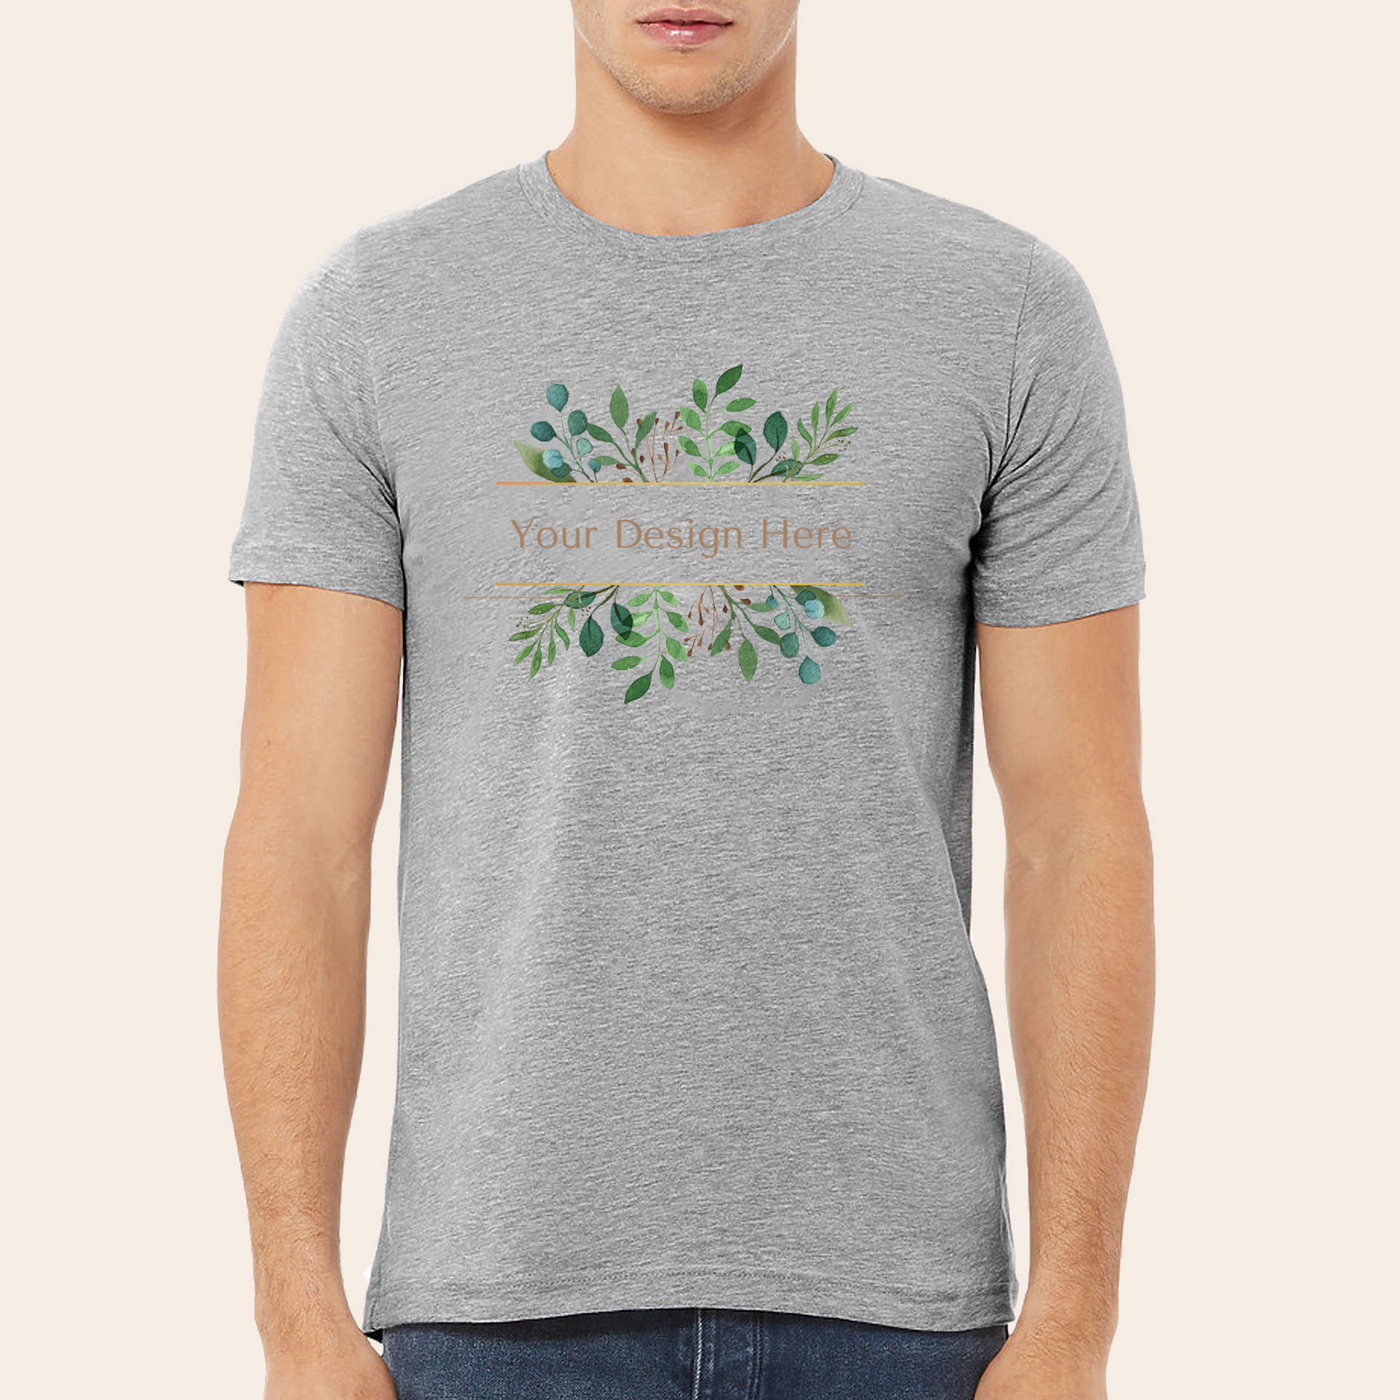 Bella and Canvas Unisex Heather Gray T-Shir